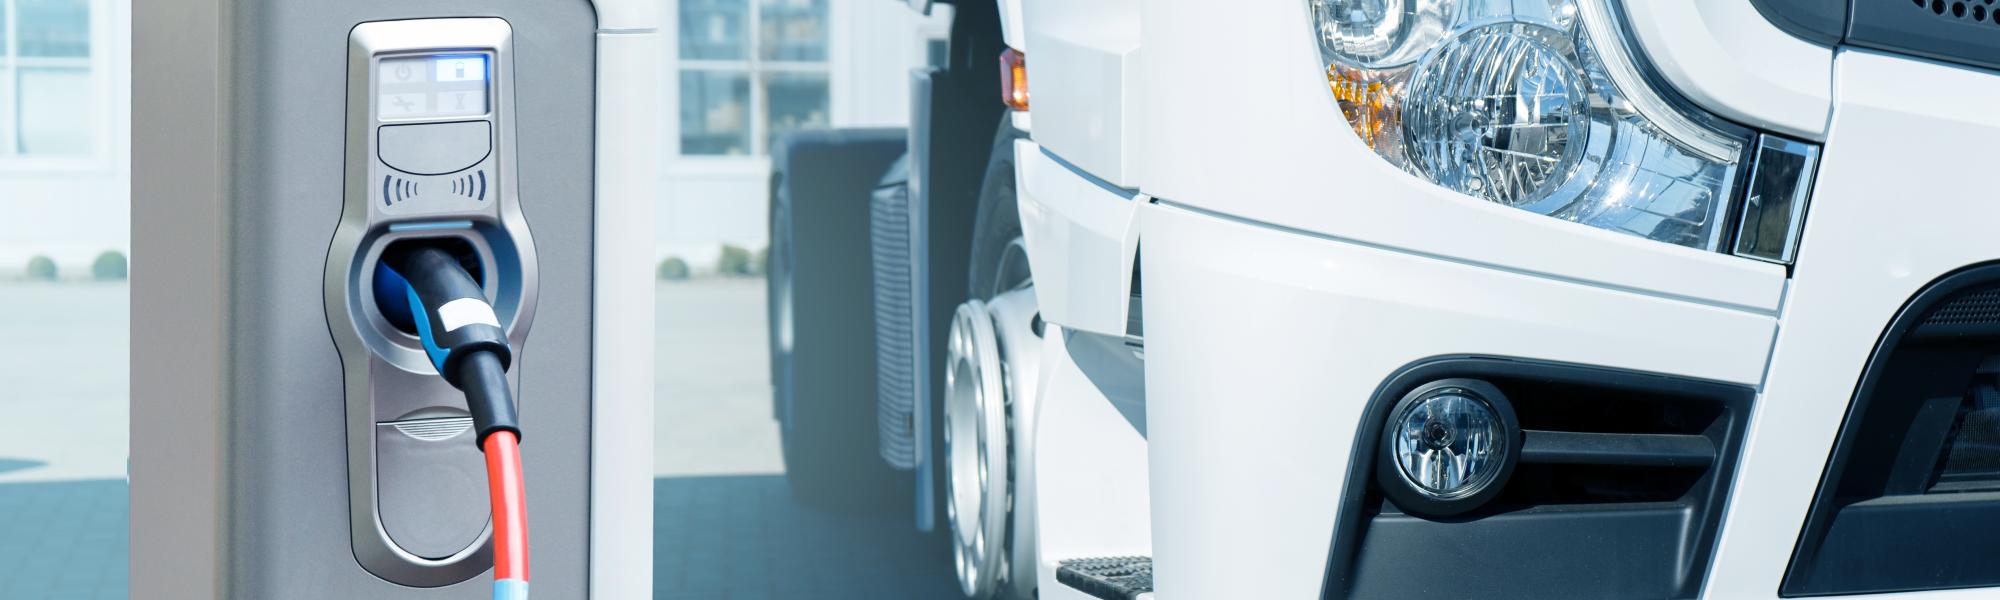 Small steps forward in EU alternative fuel infrastructure deal